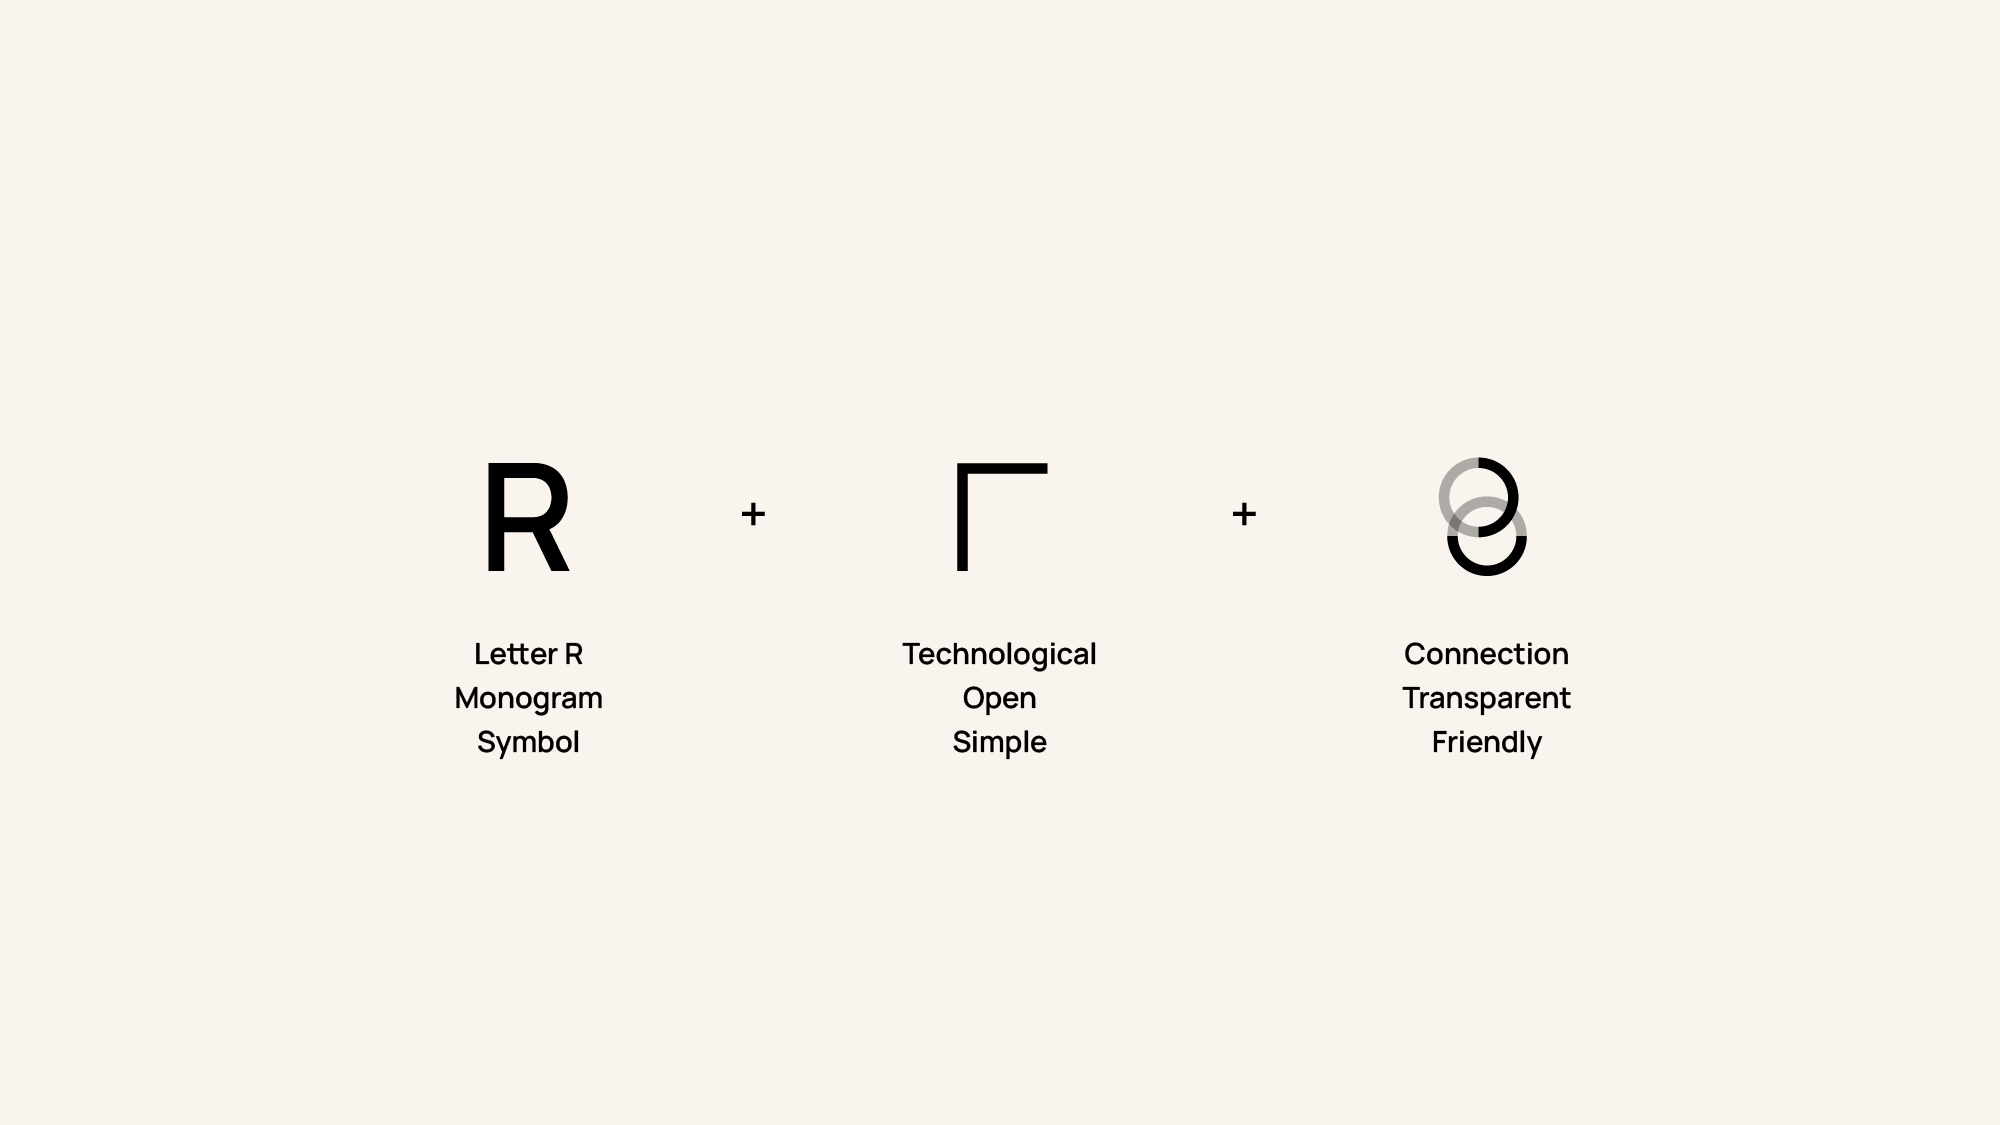 Symolic meanings of different components in logomark